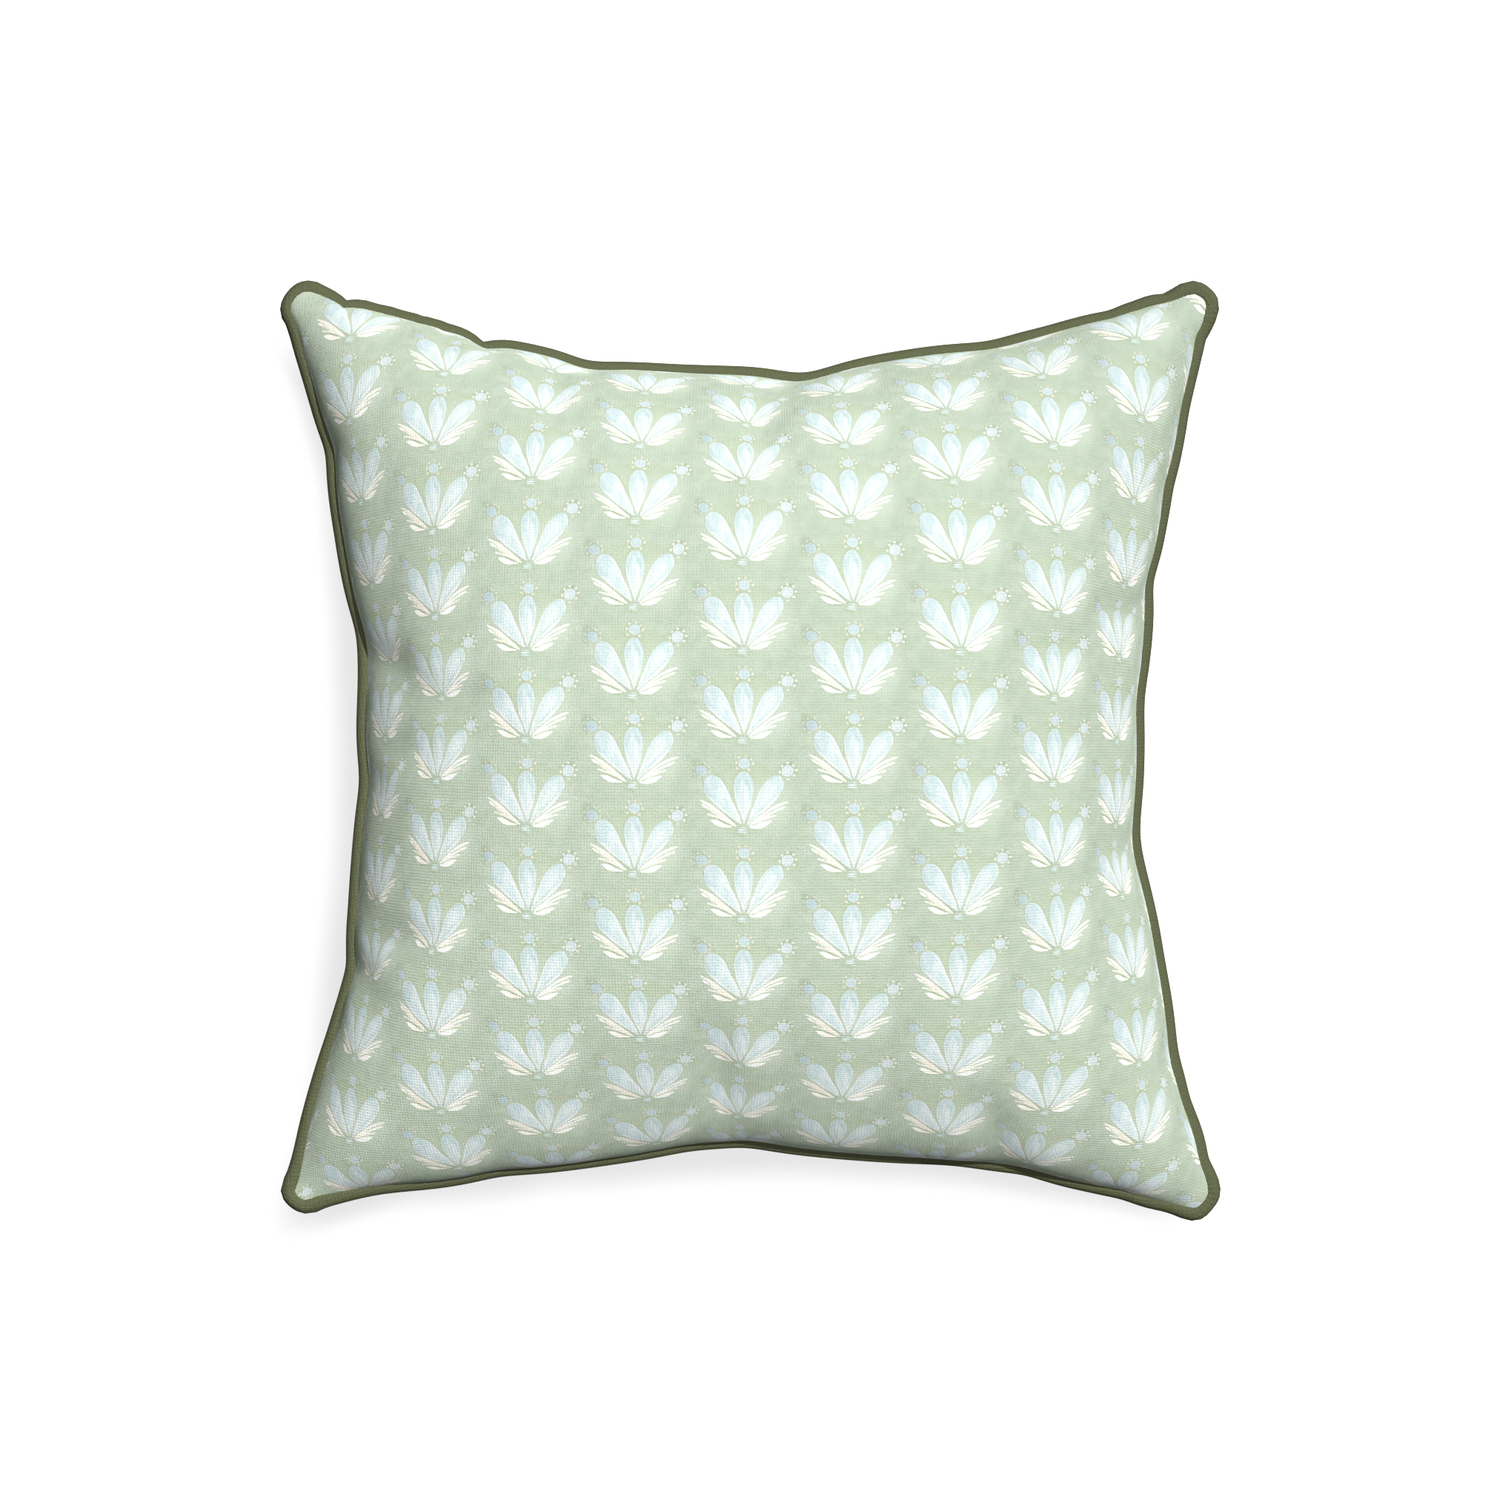 20-square serena sea salt custom blue & green floral drop repeatpillow with f piping on white background